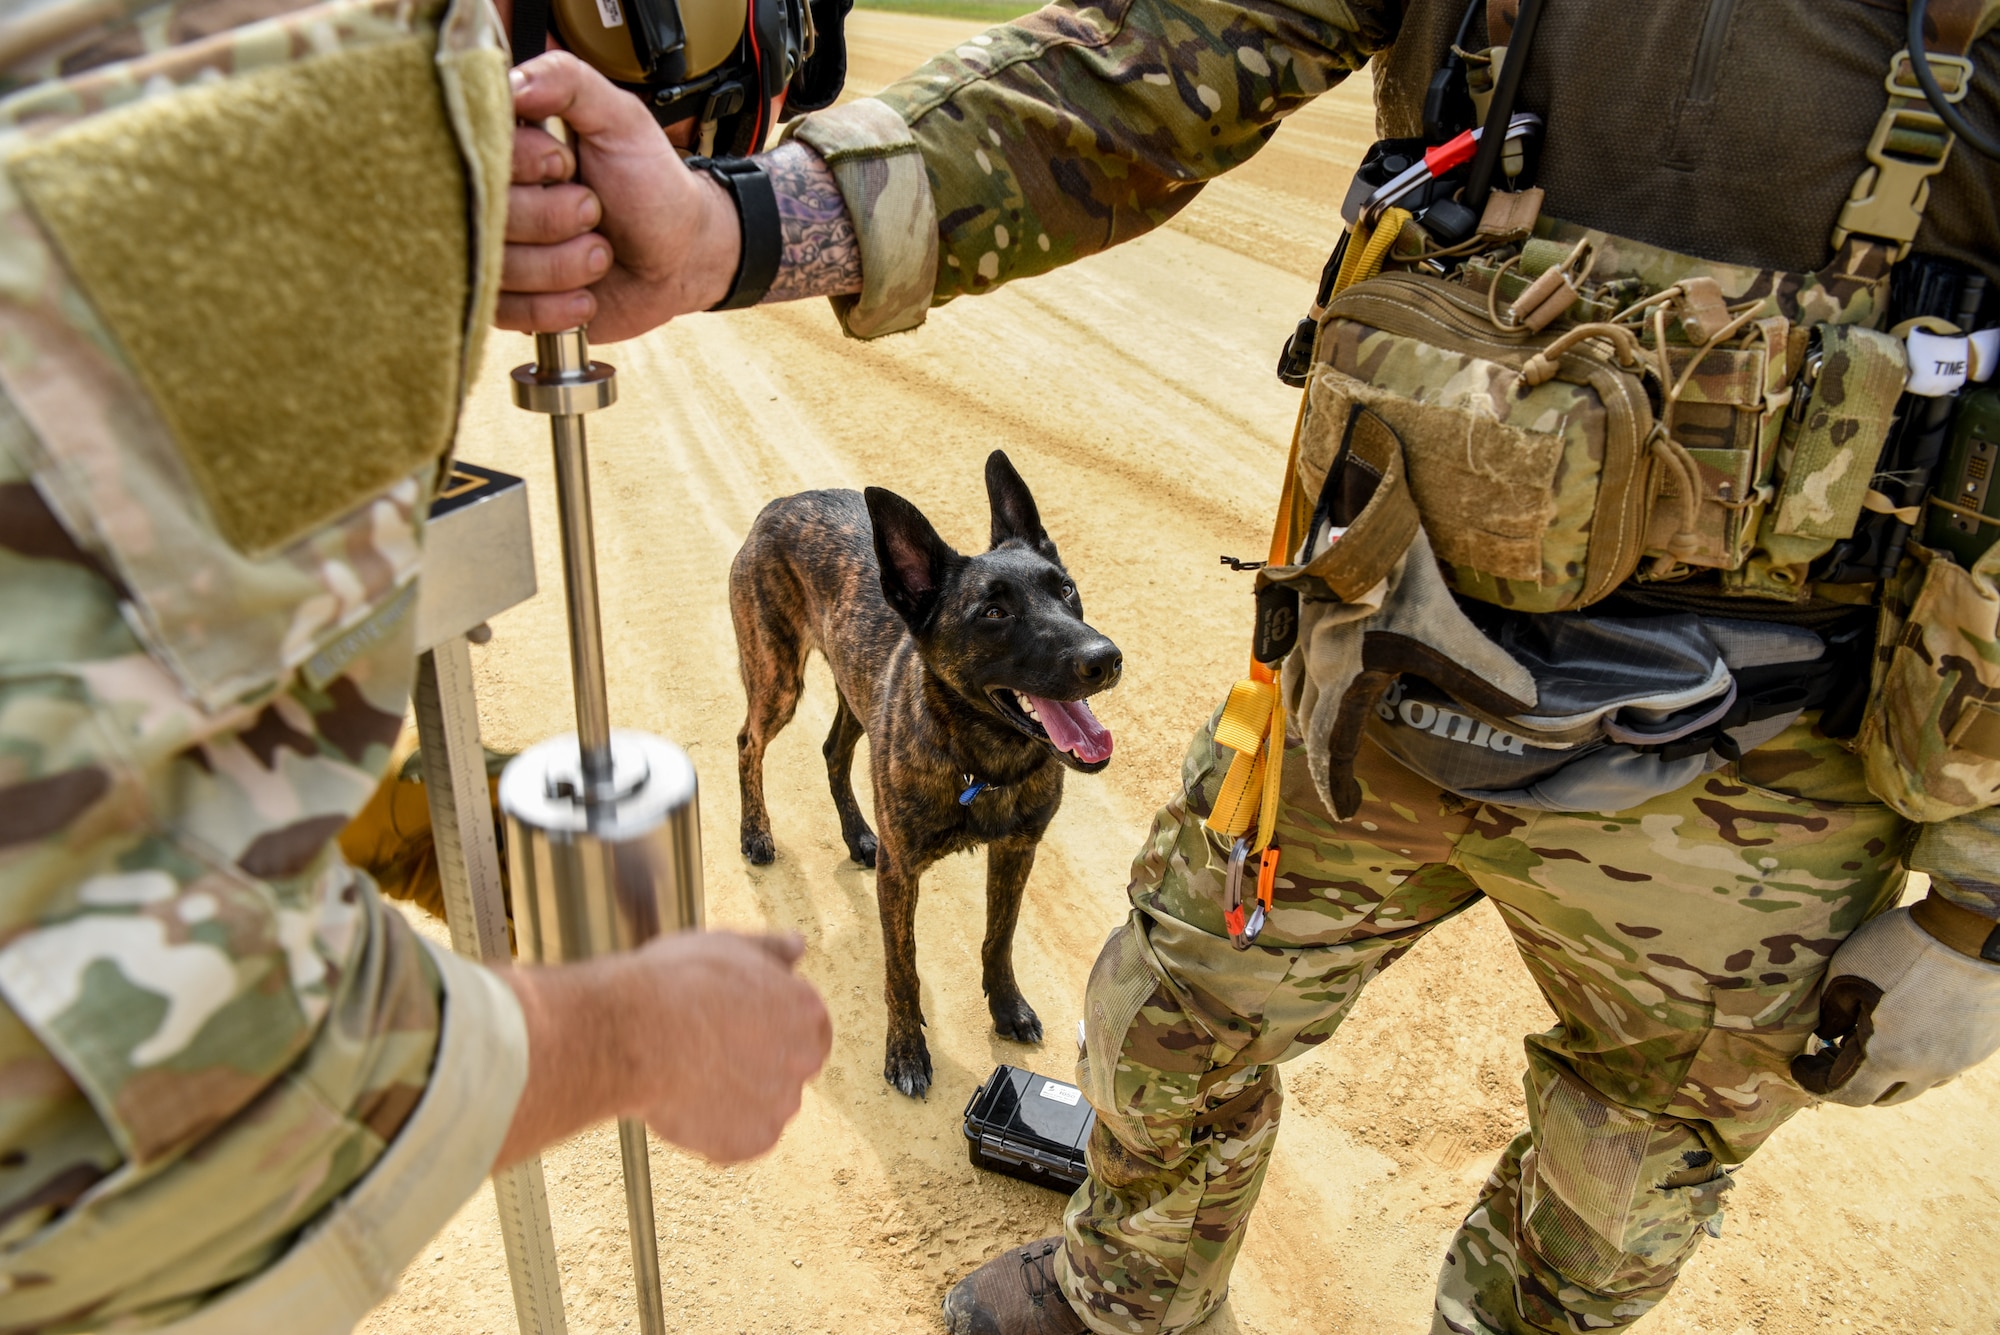 Callie, a search and rescue dog for the 123rd Special Tactics Squadron, participates in Patriot North, an annual domestic operations exercise designed to provide natural disaster-response training at Volk Field, Wis., July 17, 2019. Callie is currently the only search and rescue dog in the Department of Defense. (U.S. Air National Guard photo by Staff Sgt. Joshua Horton)